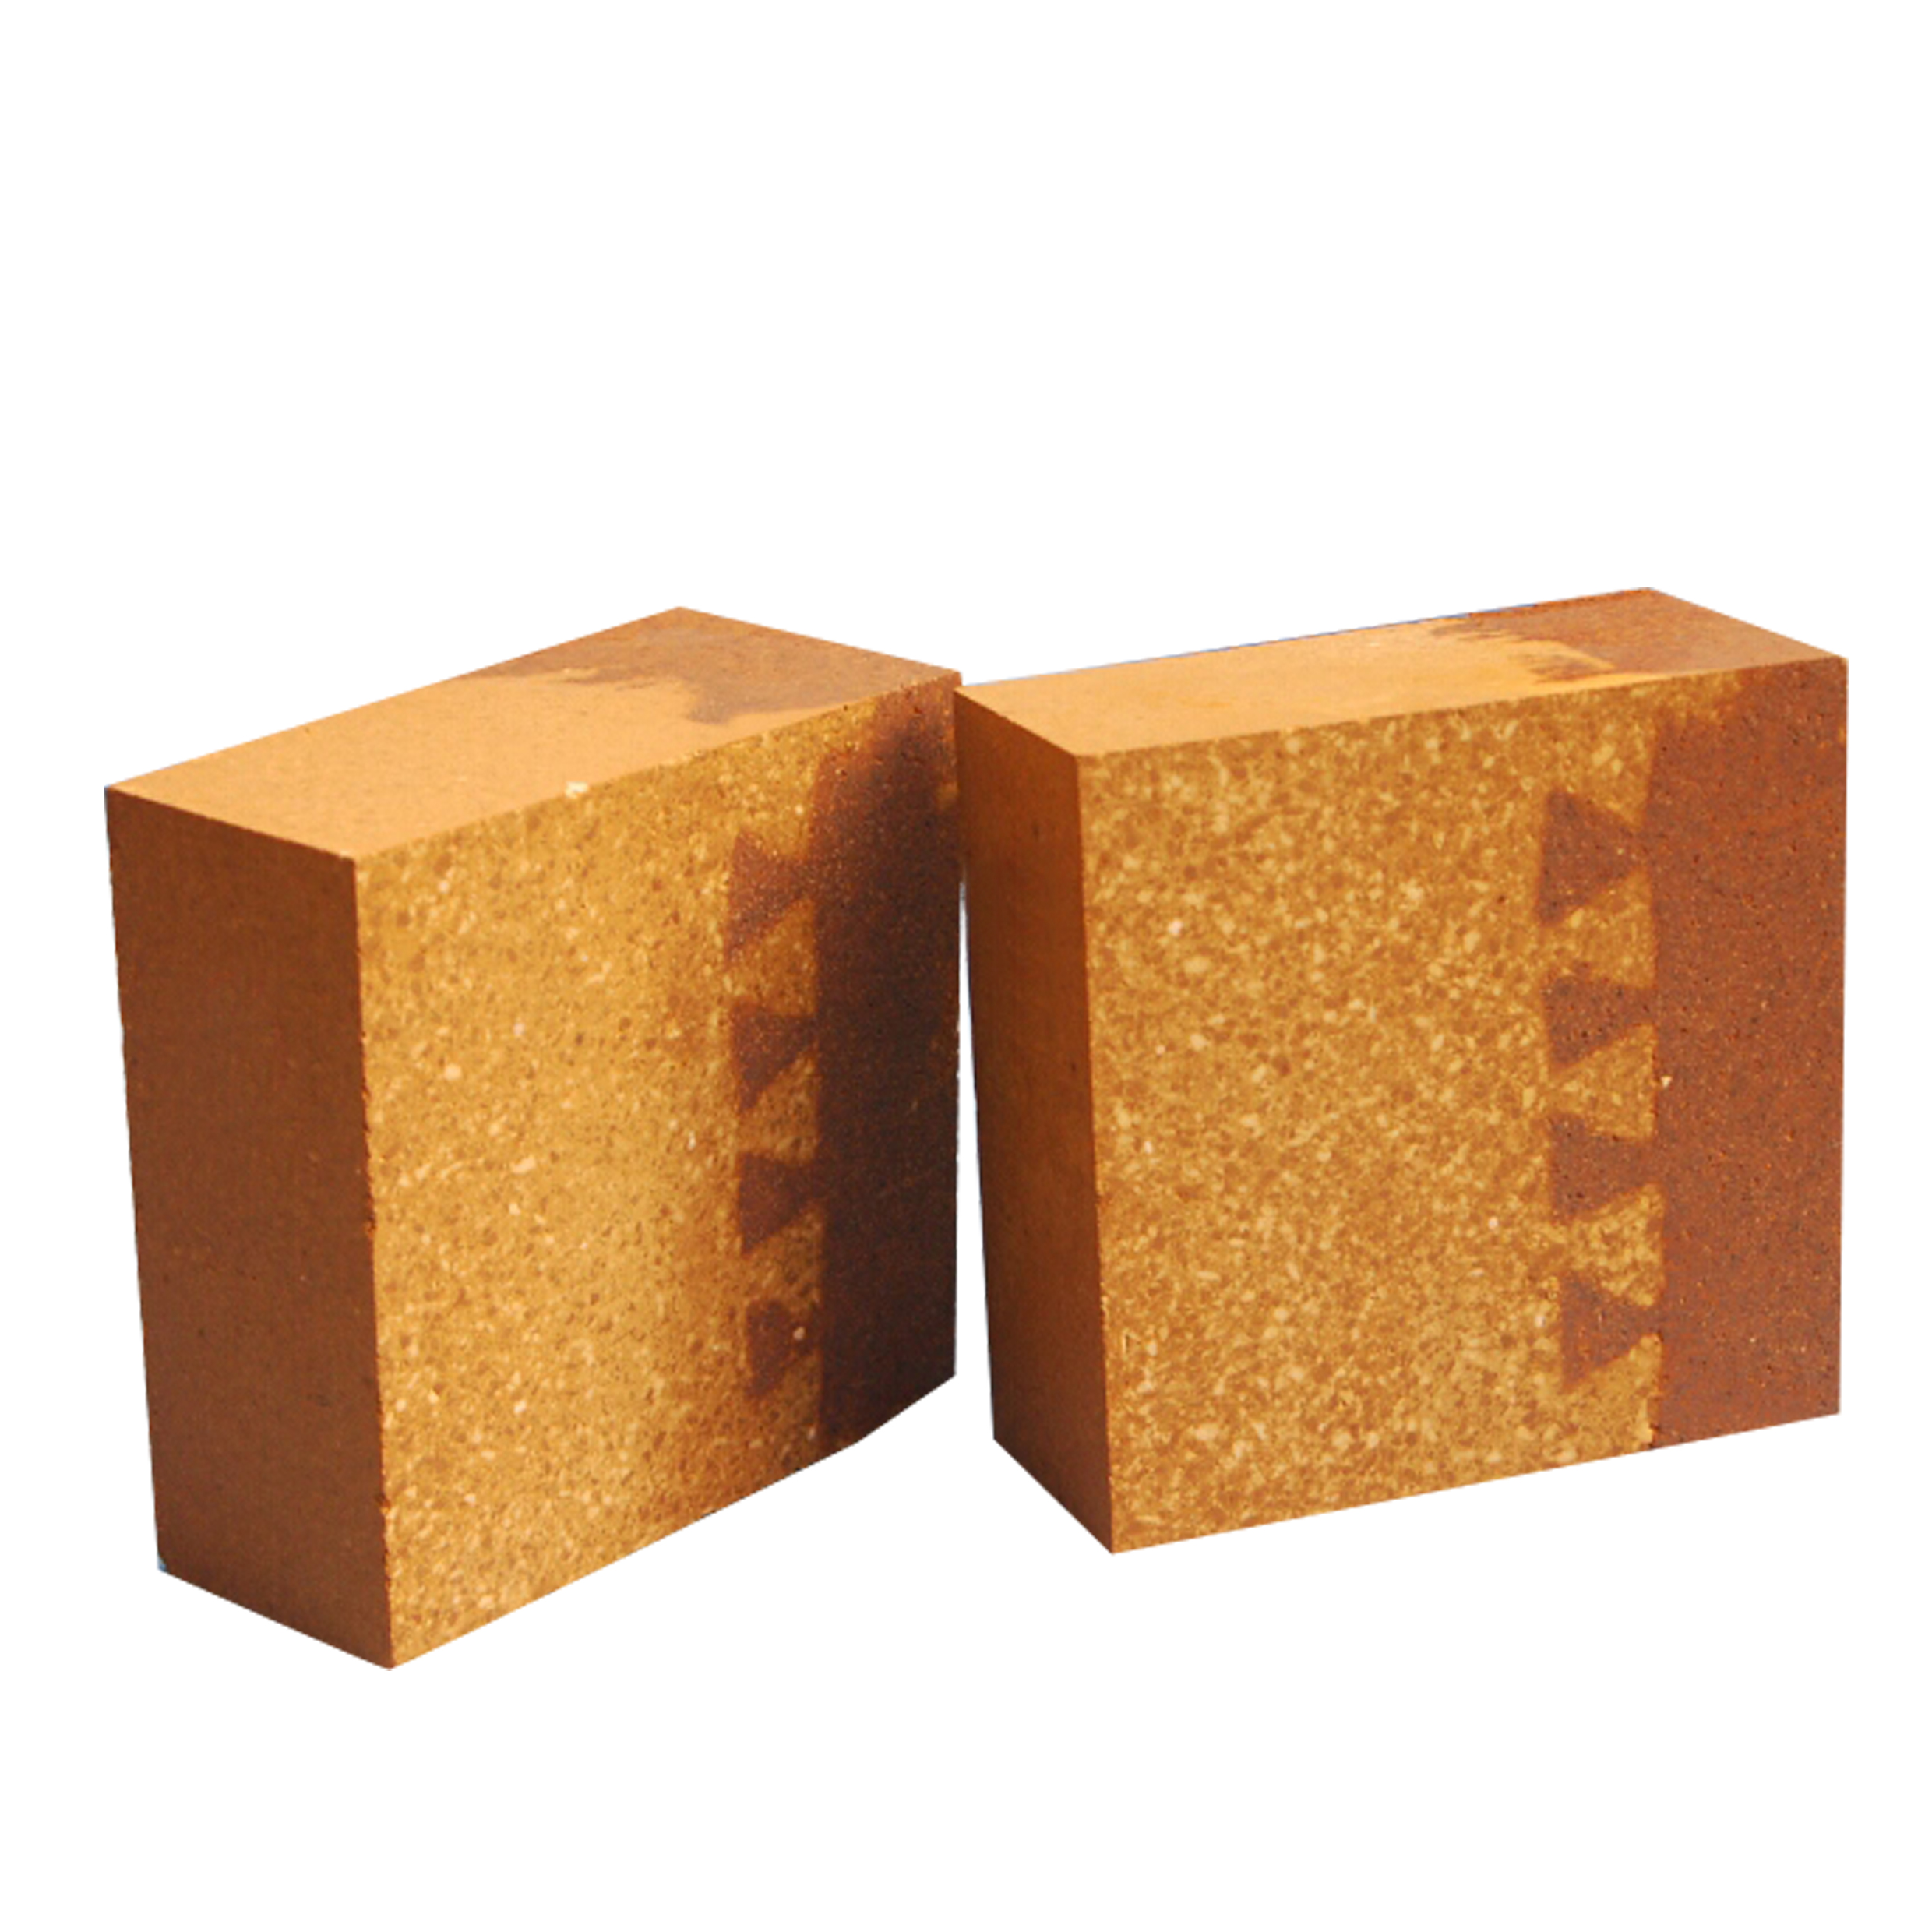 Silicone wear-resistant composite brick for transition zone